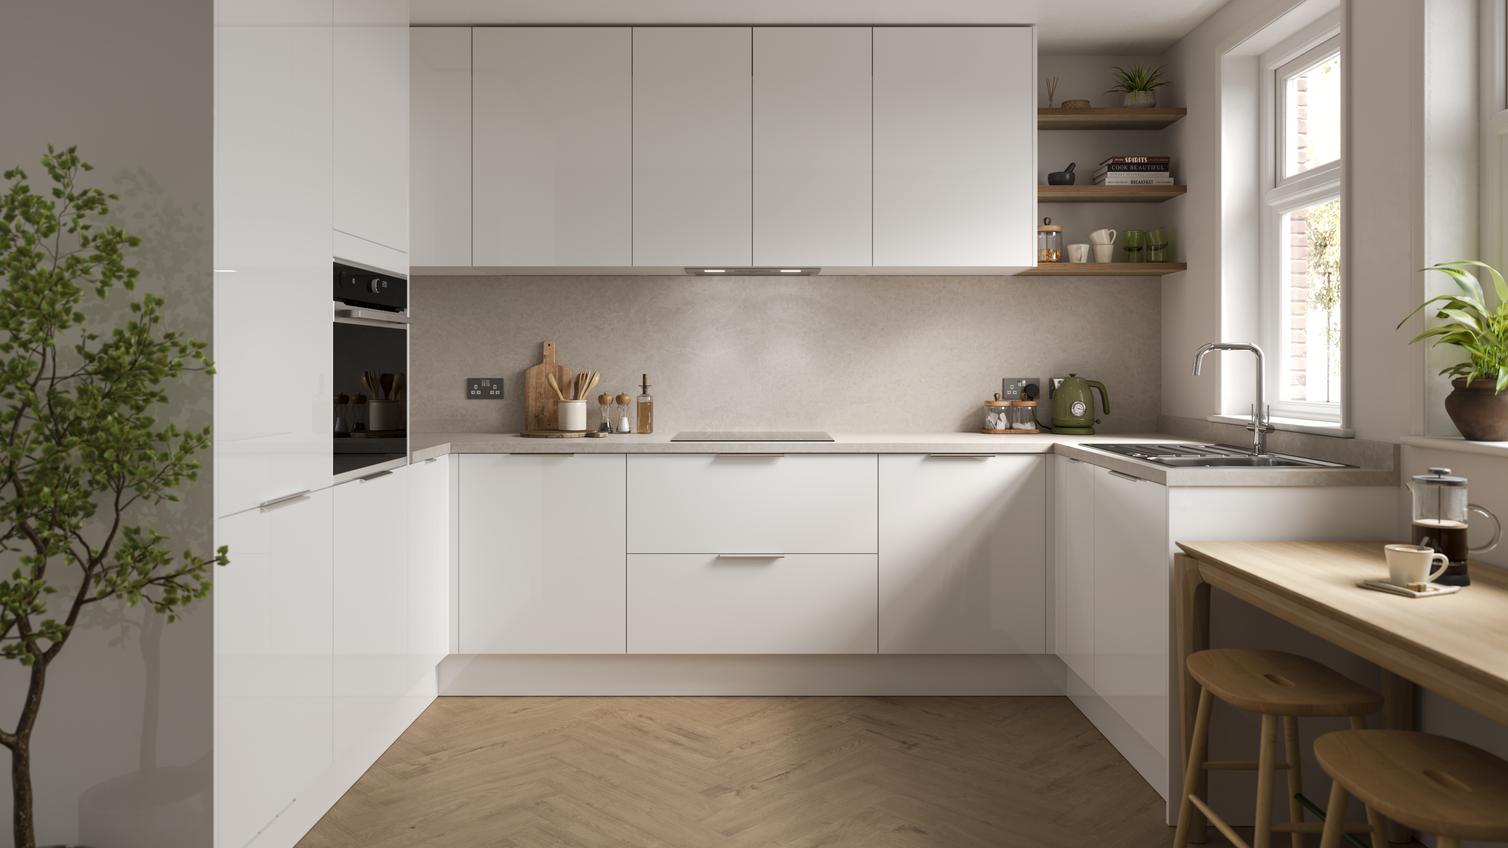 A gloss white kitchen from the Greenwich range, in a U-shaped layout with integrated appliances and matching wall cabinets.